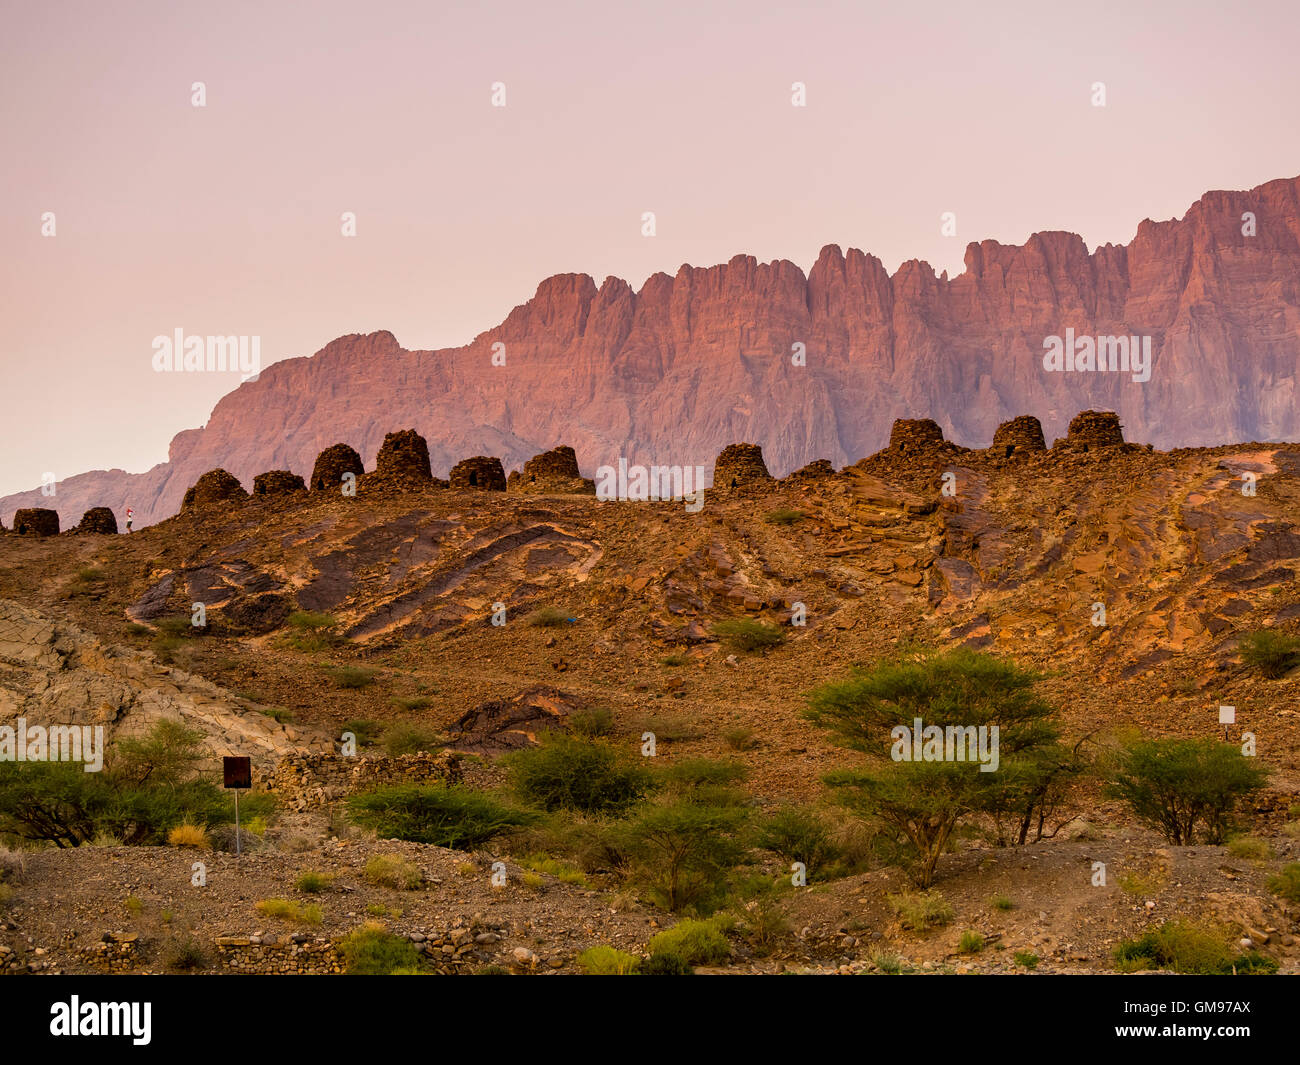 Oman, Ad-Dakhiliyah, Jabal Misht, Al-Ain, beehive tombs, site of an excavation in the evening Stock Photo